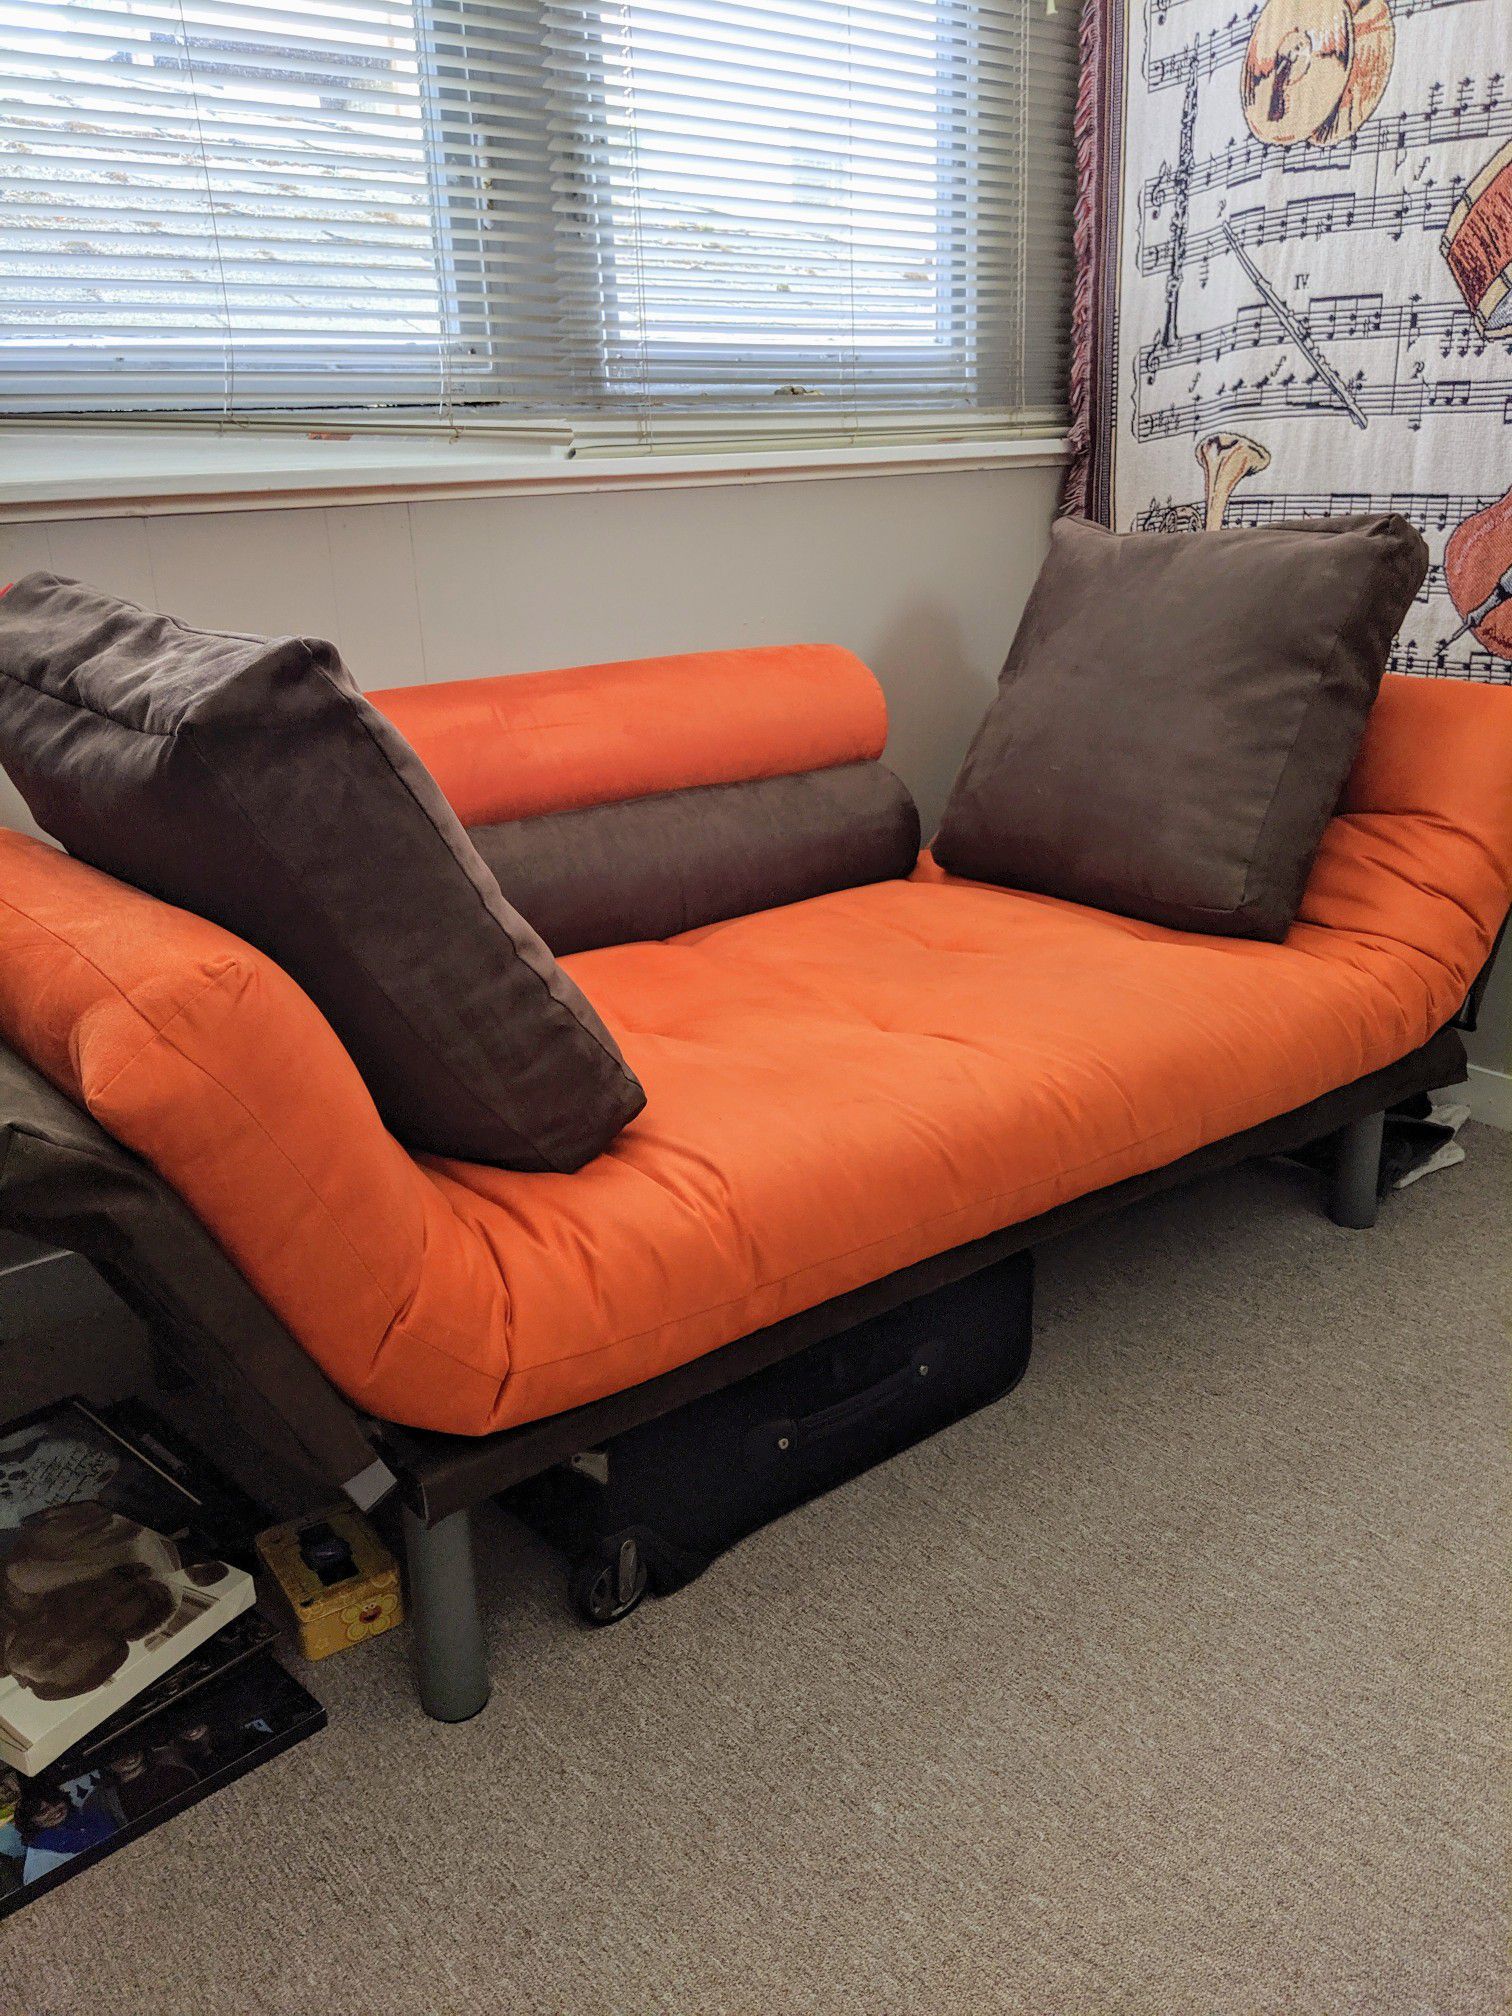 Cozy and compact single futon for sale in SF